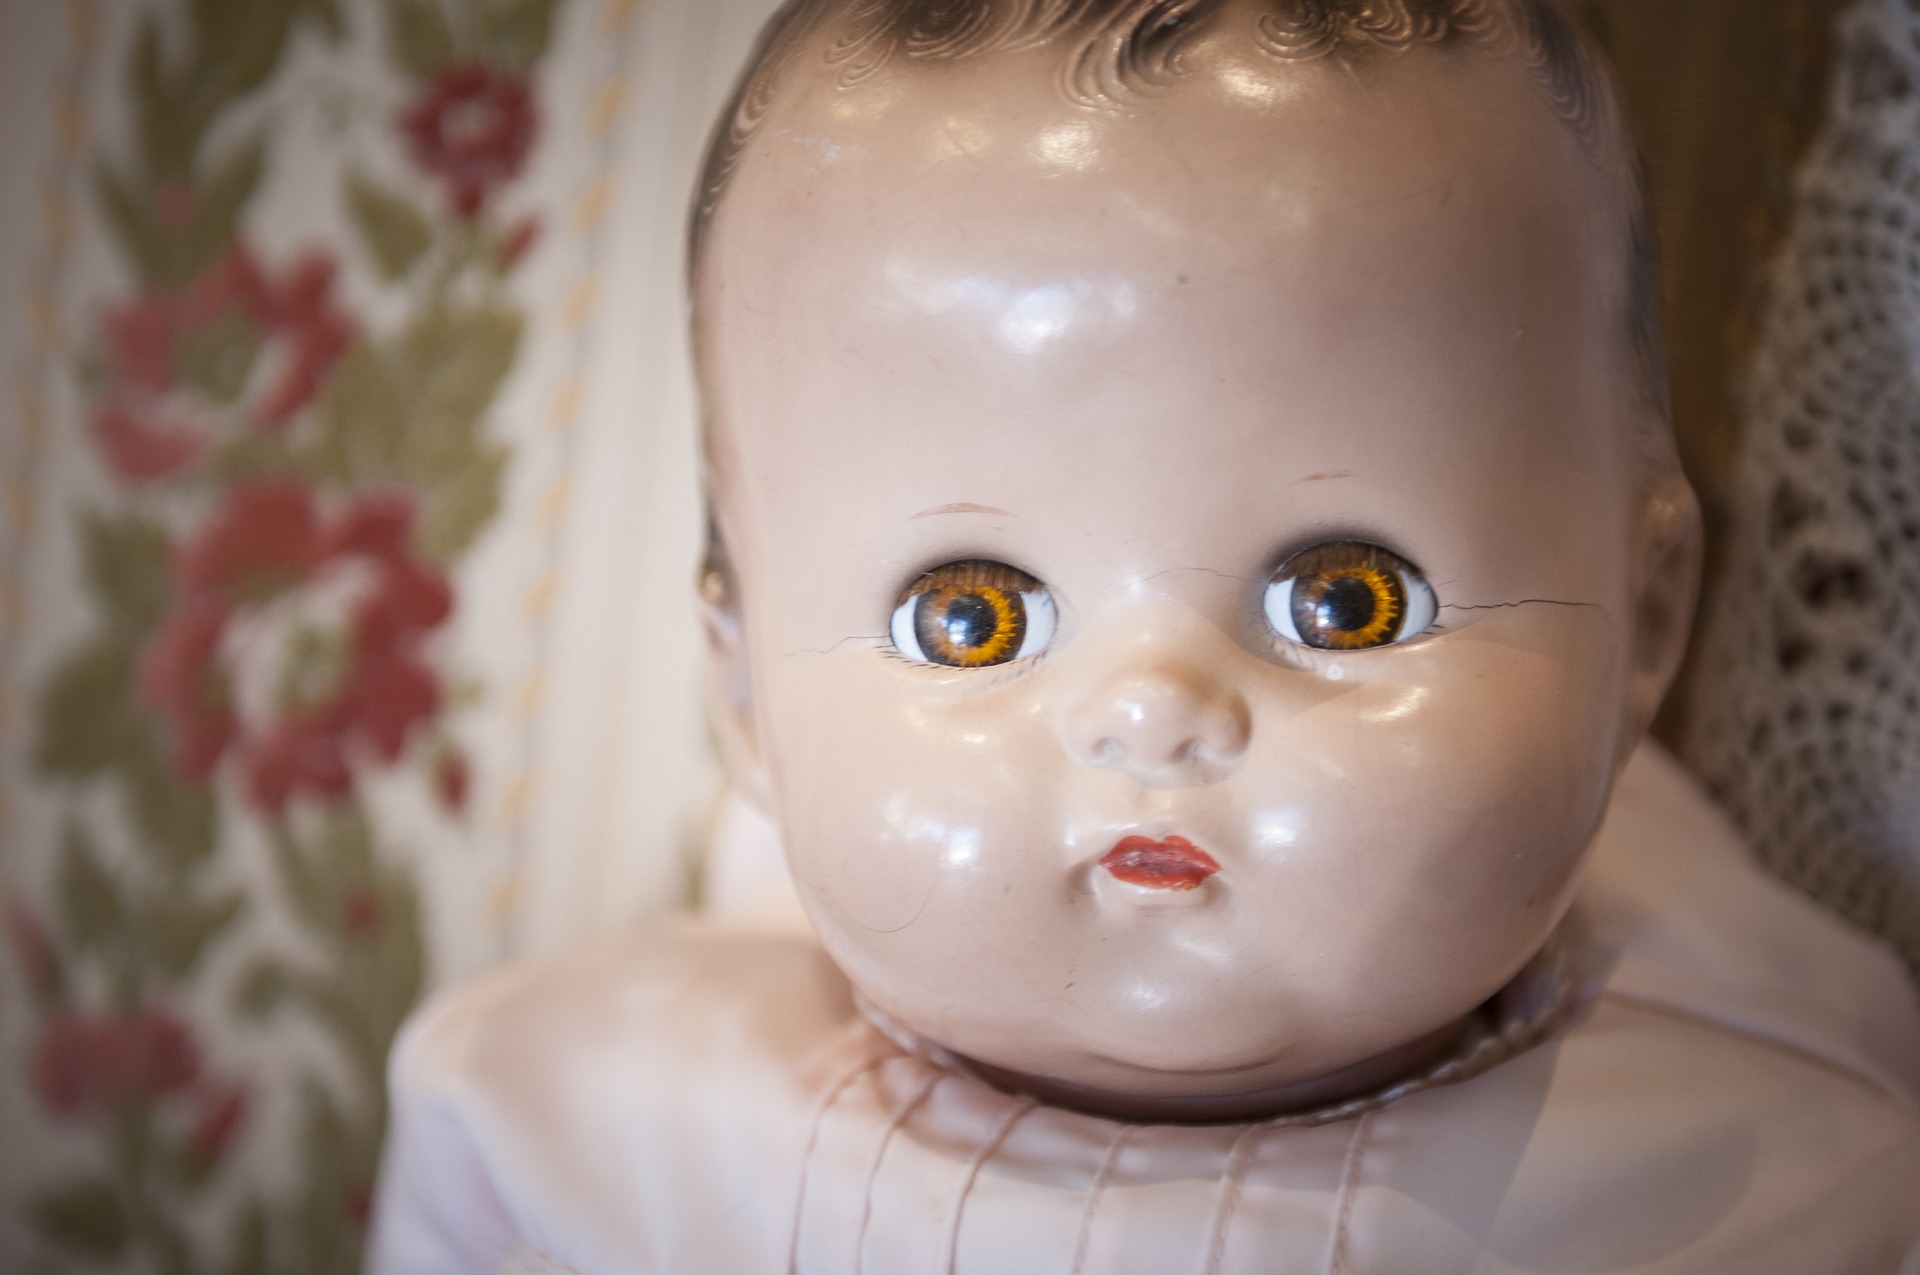 Westland London's guide to identifying antique dolls